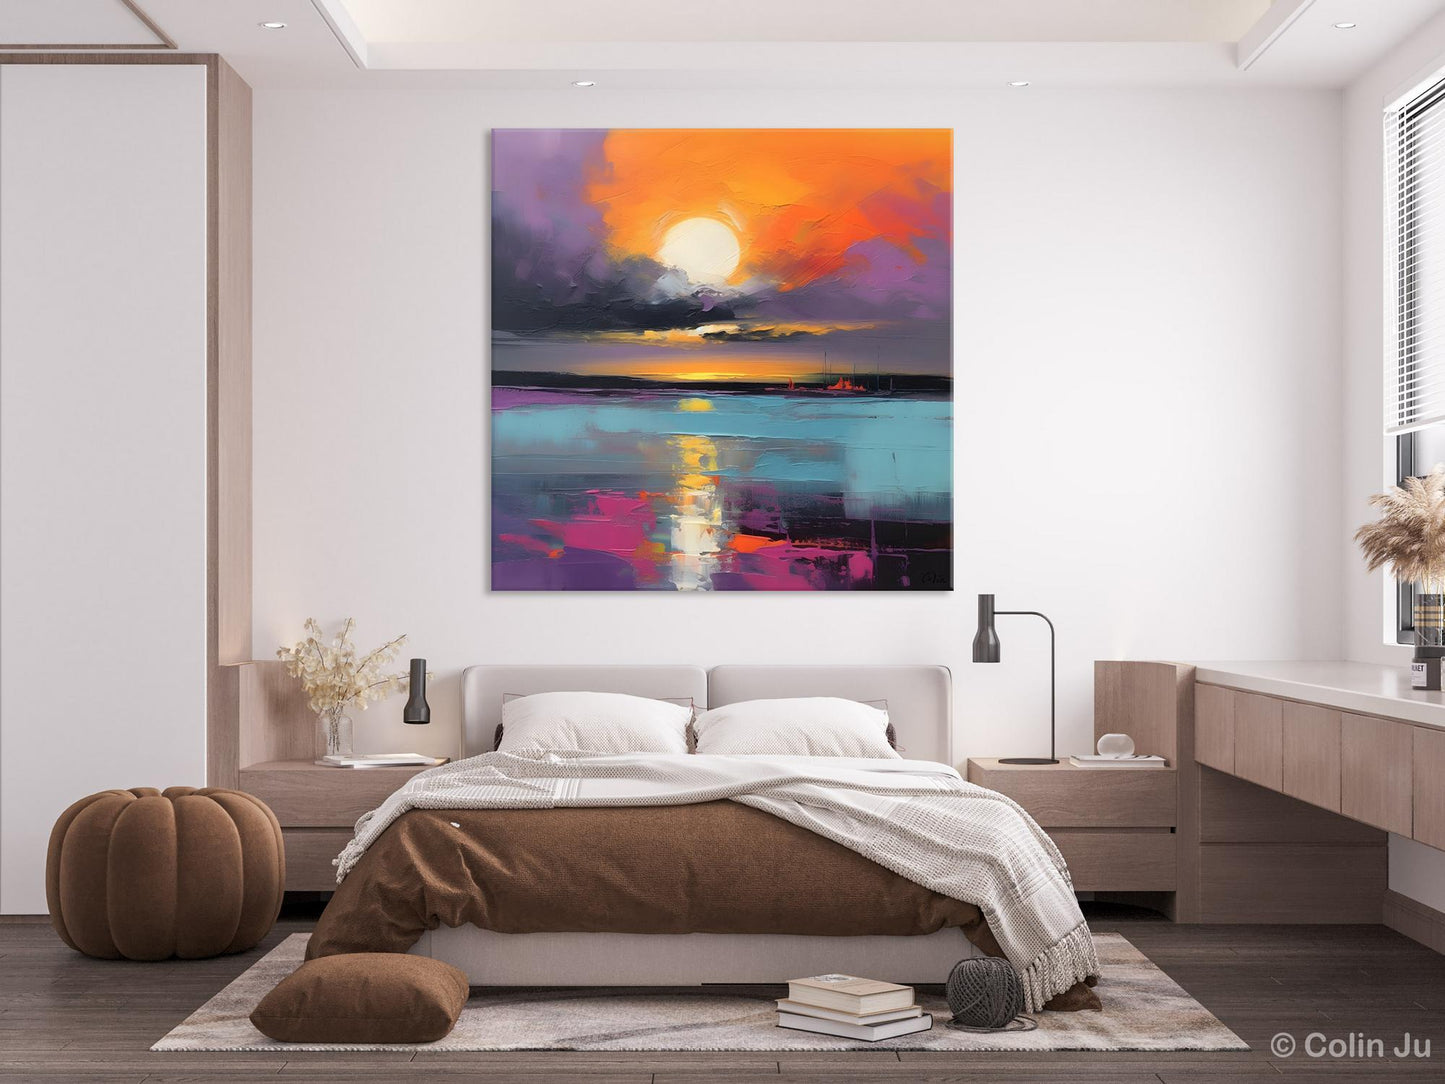 Abstract Landscape Artwork, Landscape Painting on Canvas, Hand Painted Canvas Art, Contemporary Wall Art Paintings, Extra Large Original Art